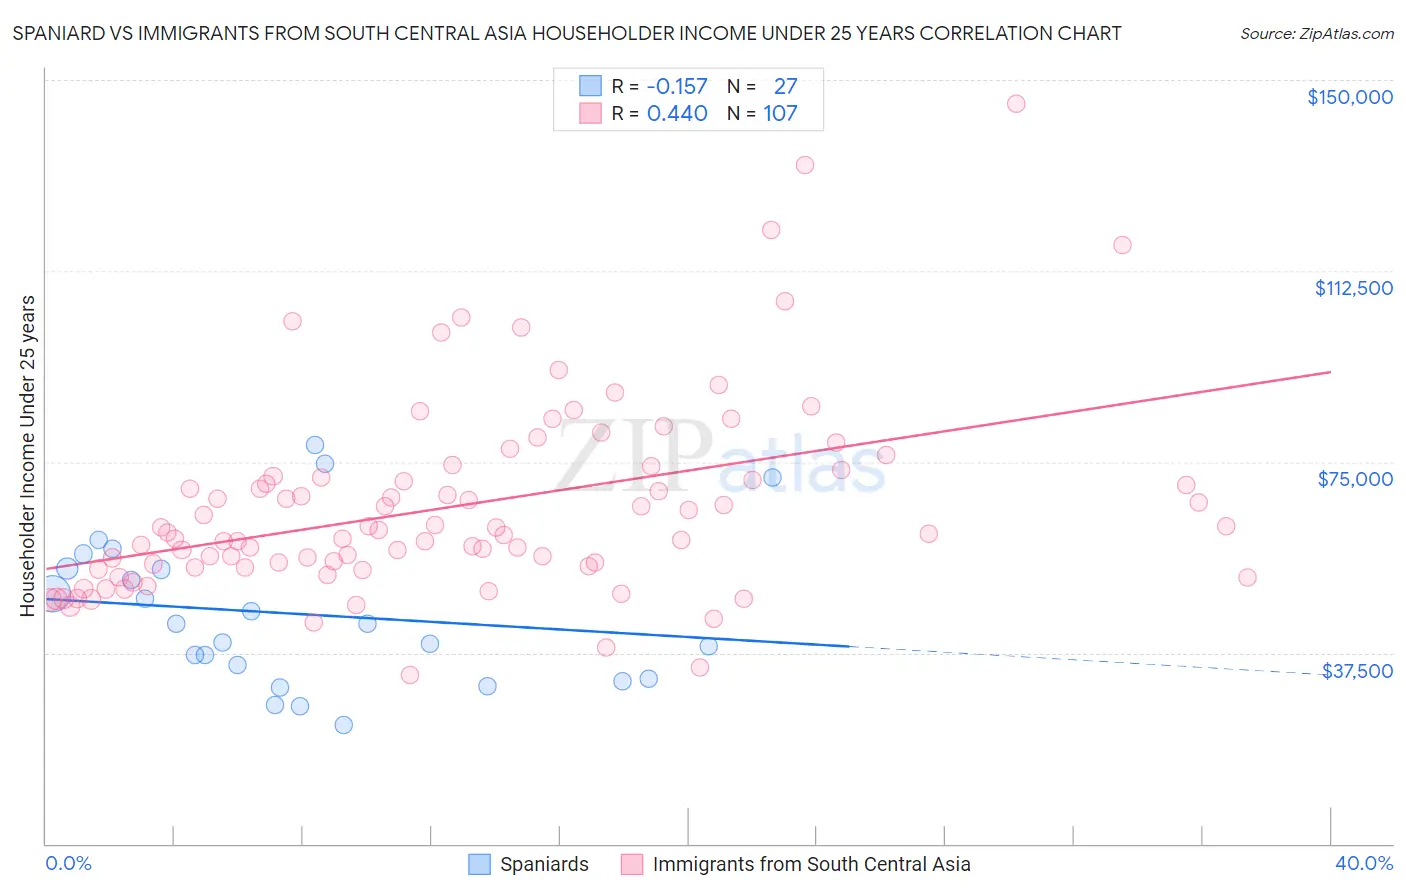 Spaniard vs Immigrants from South Central Asia Householder Income Under 25 years